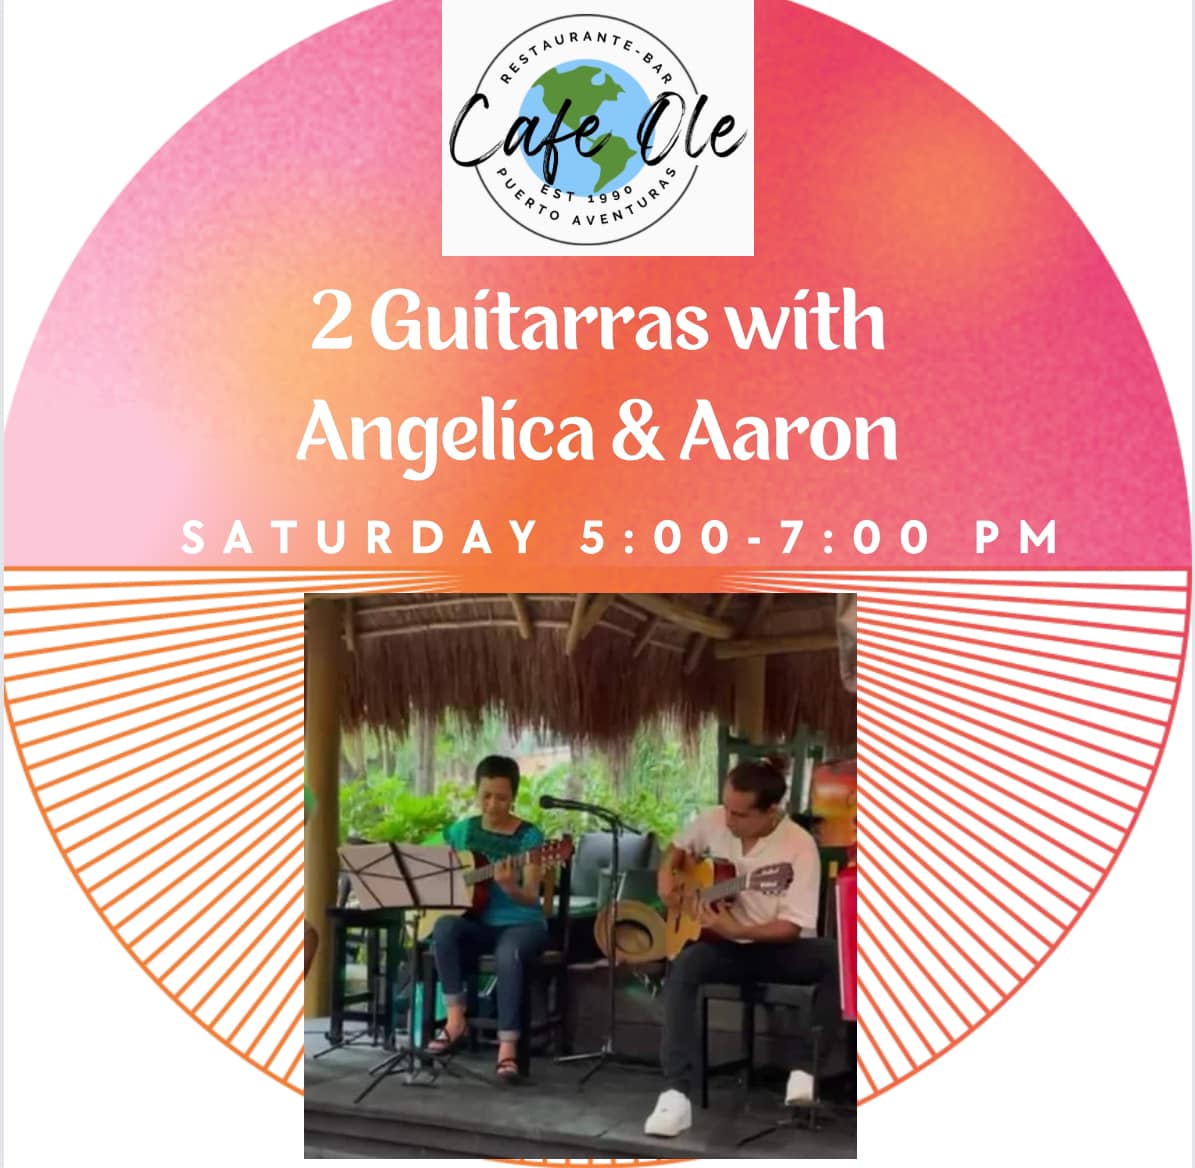 Angelica and Aaron on Guitar @ Cafe Ole